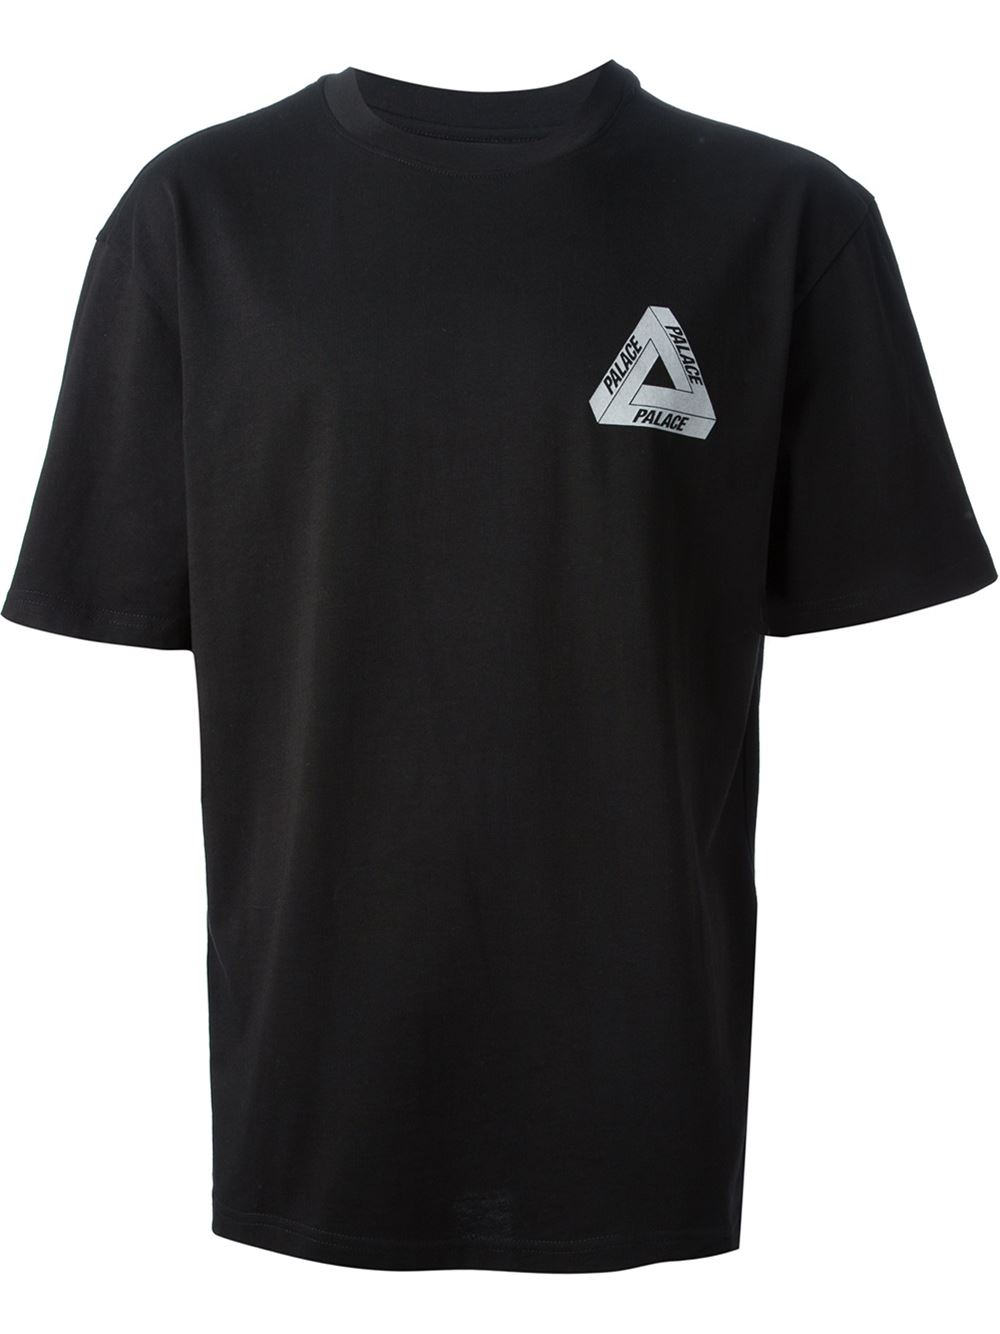 Lyst - Palace Logo T-Shirt in Black for Men